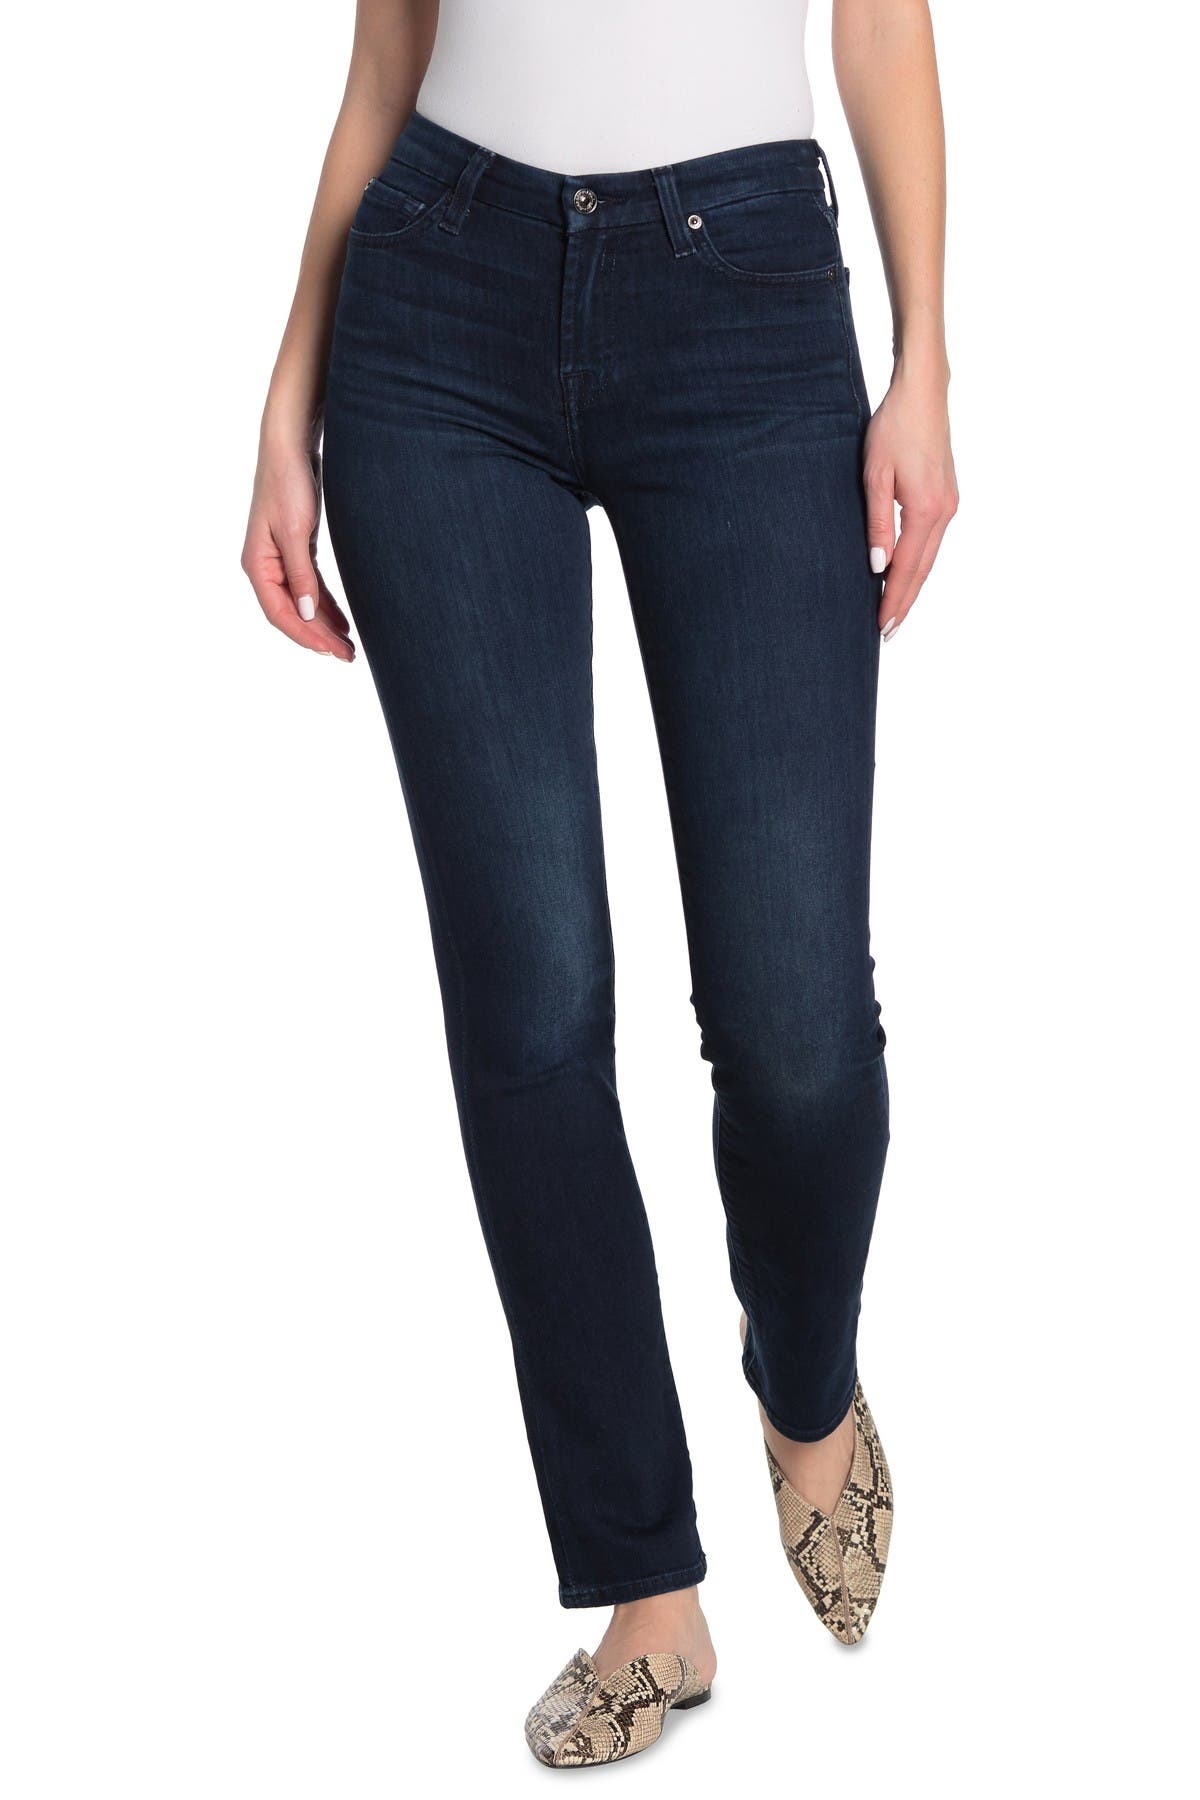 7 for all mankind kimmie straight jeans